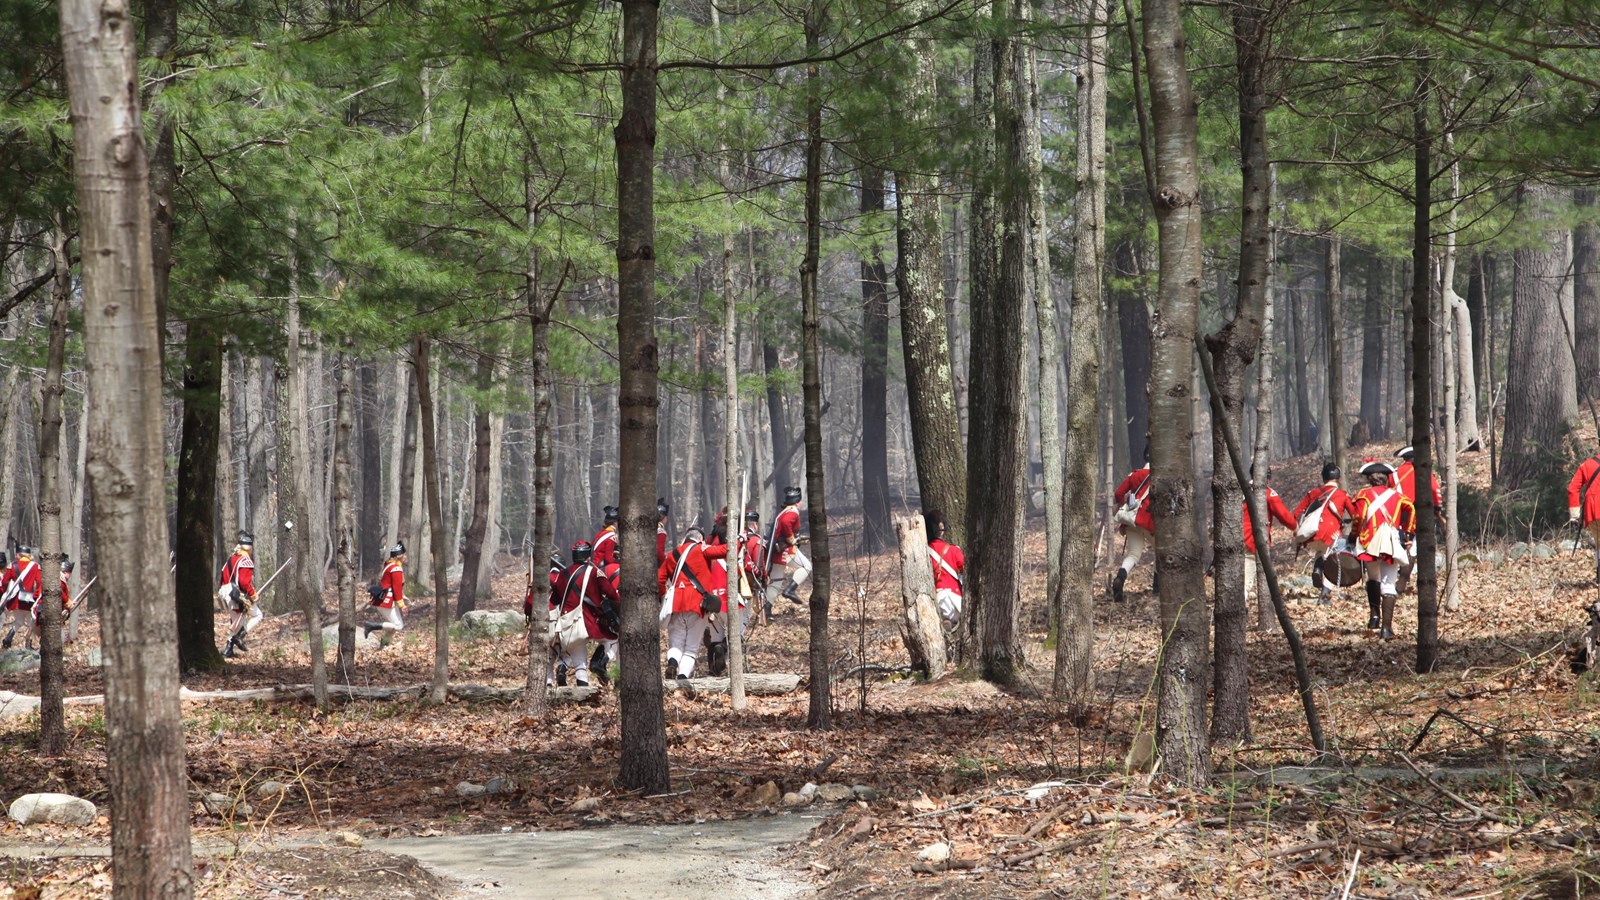 Red-coated British Regulars in a long thin line charge between trees up a hill.